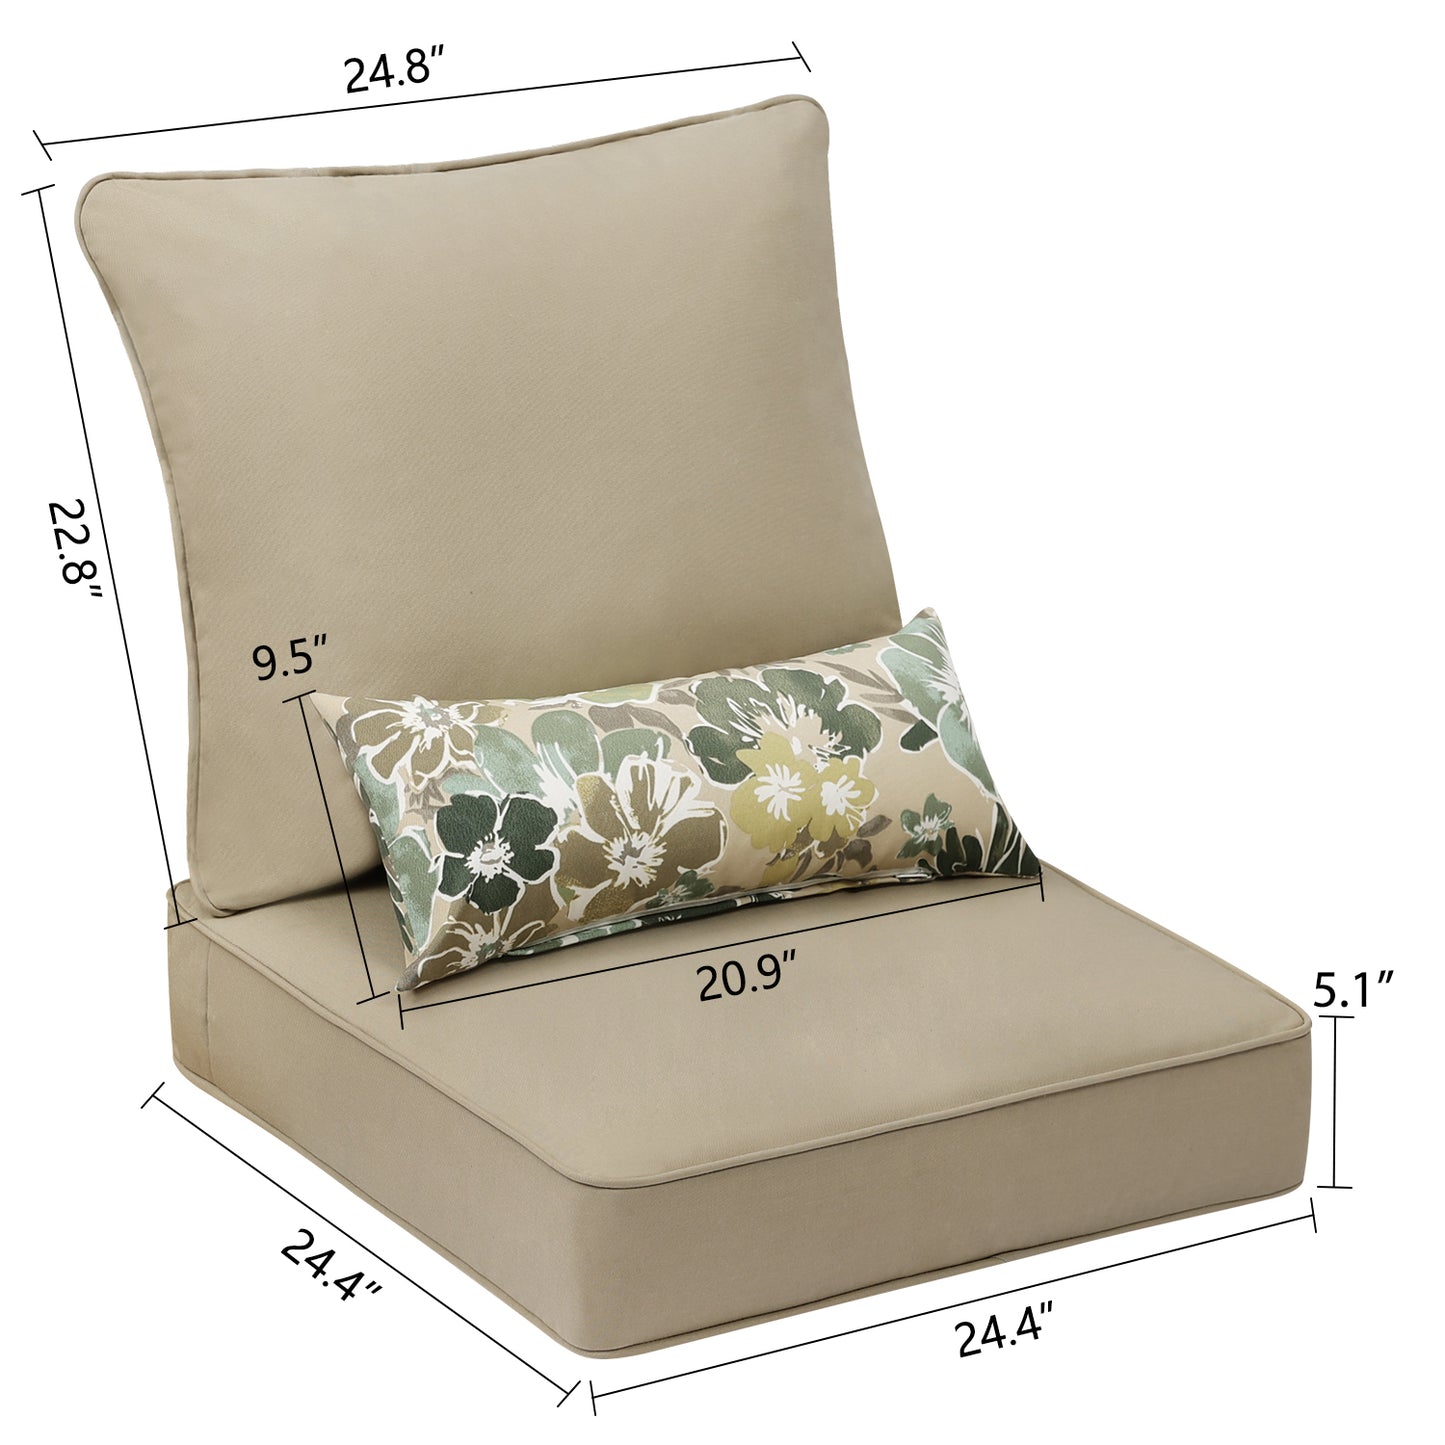 Patio Deep Chair Cushion - Set of 2 - Total 6 pieces (Brown)